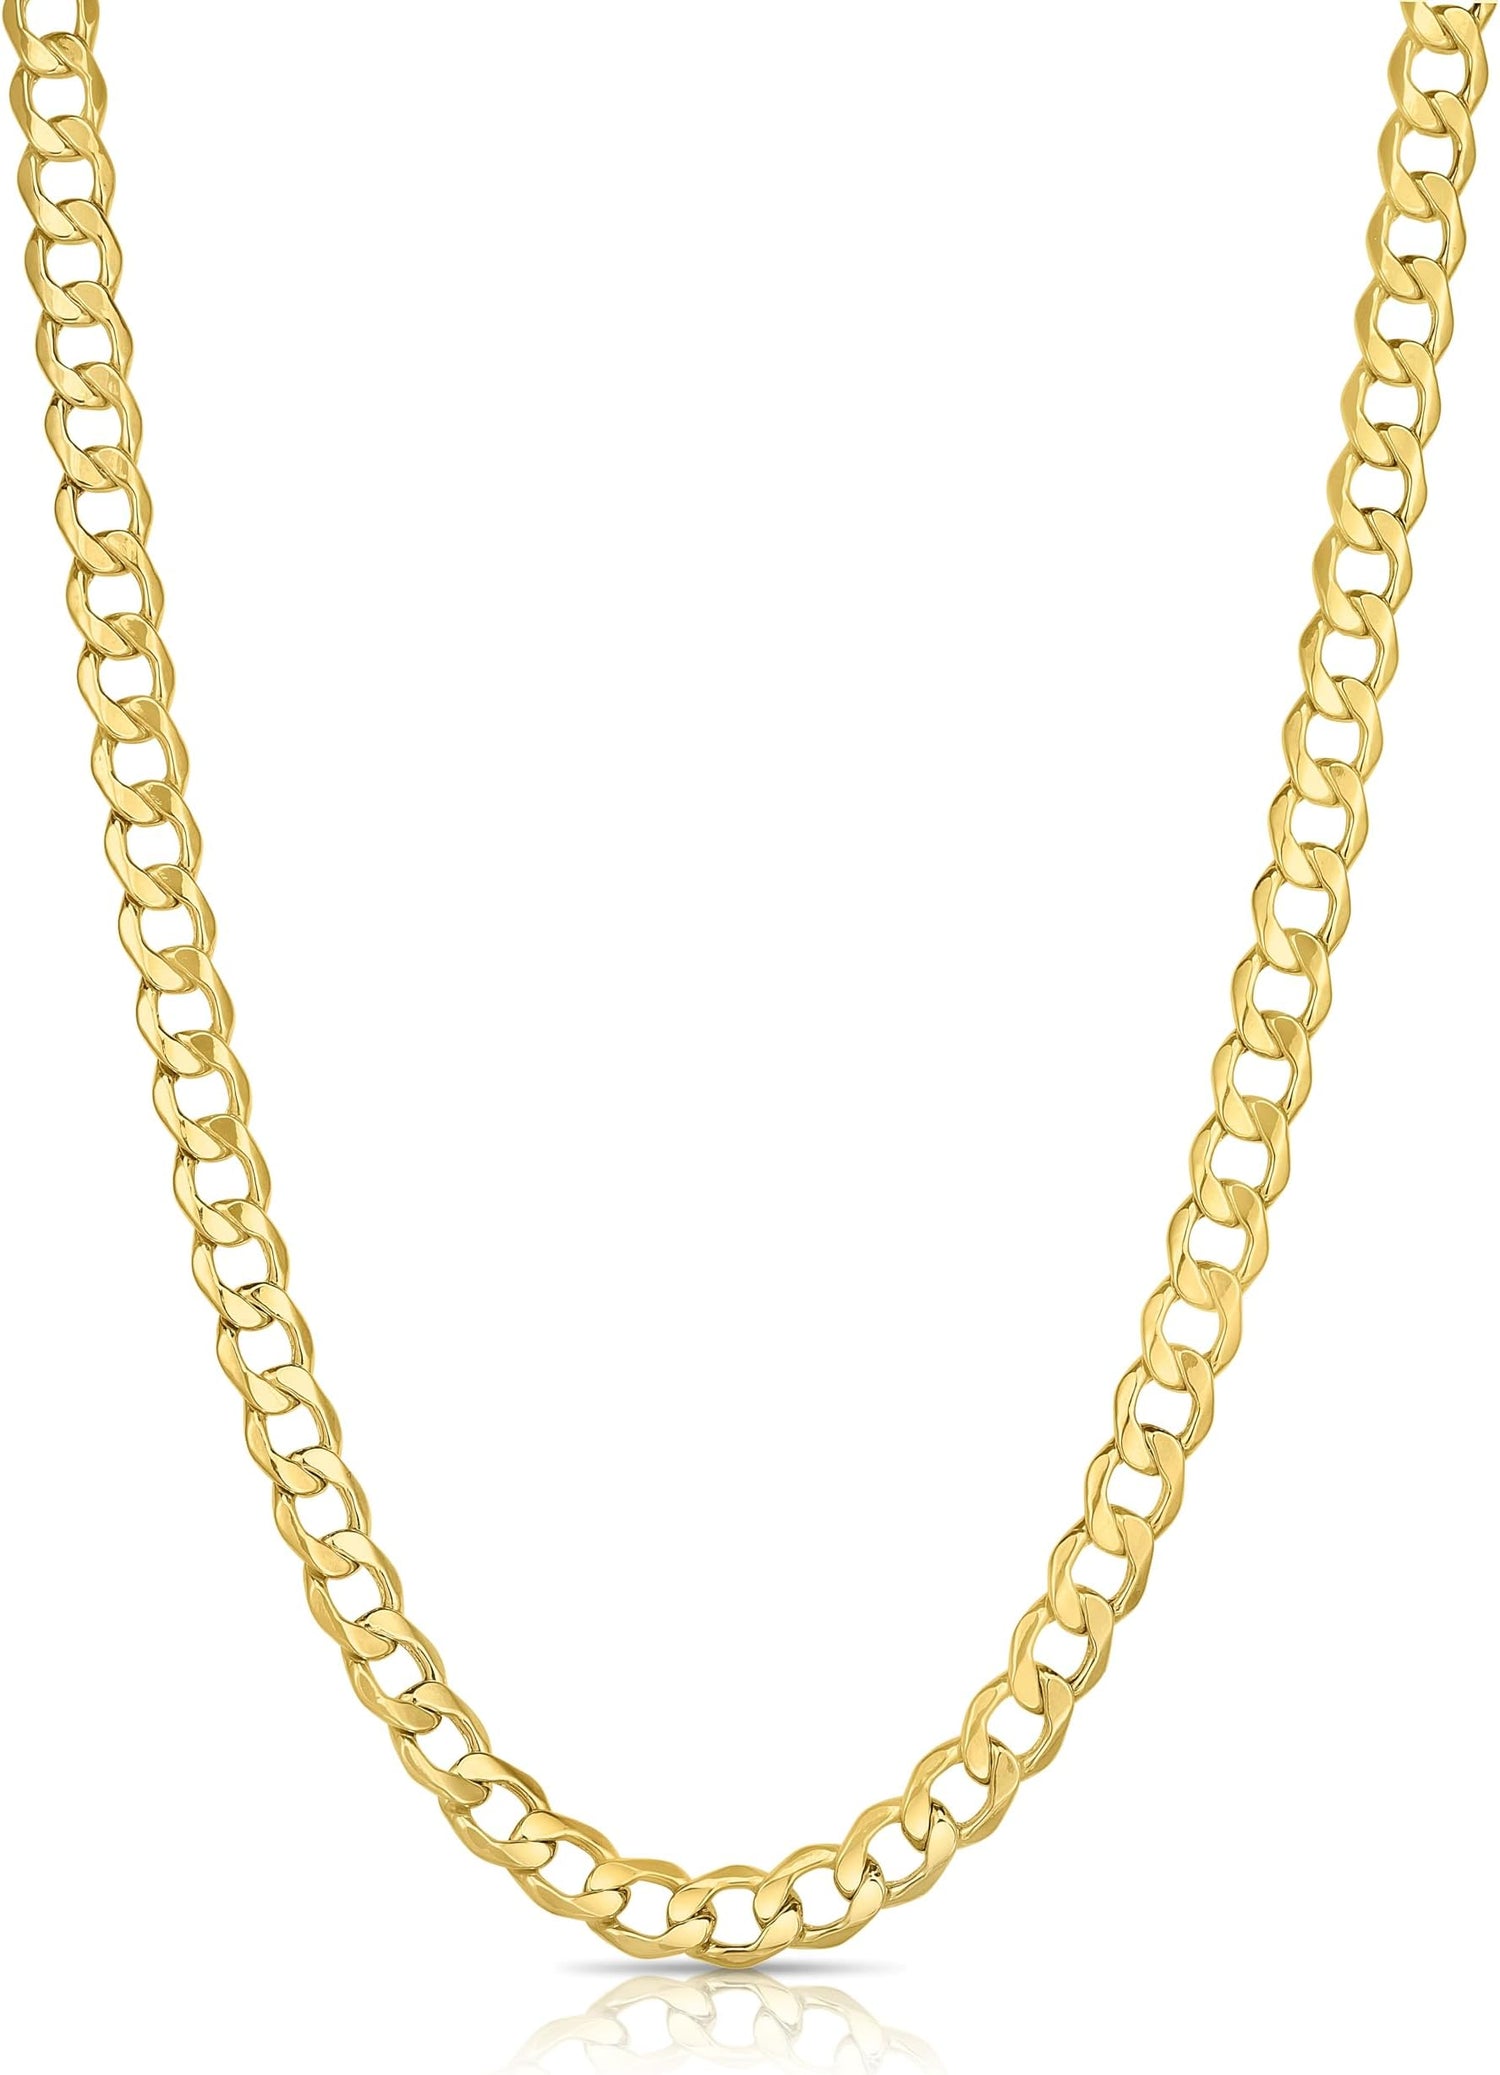 10k Yellow Gold 6.5mm Hollow Cuban Curb Link Chain Necklace